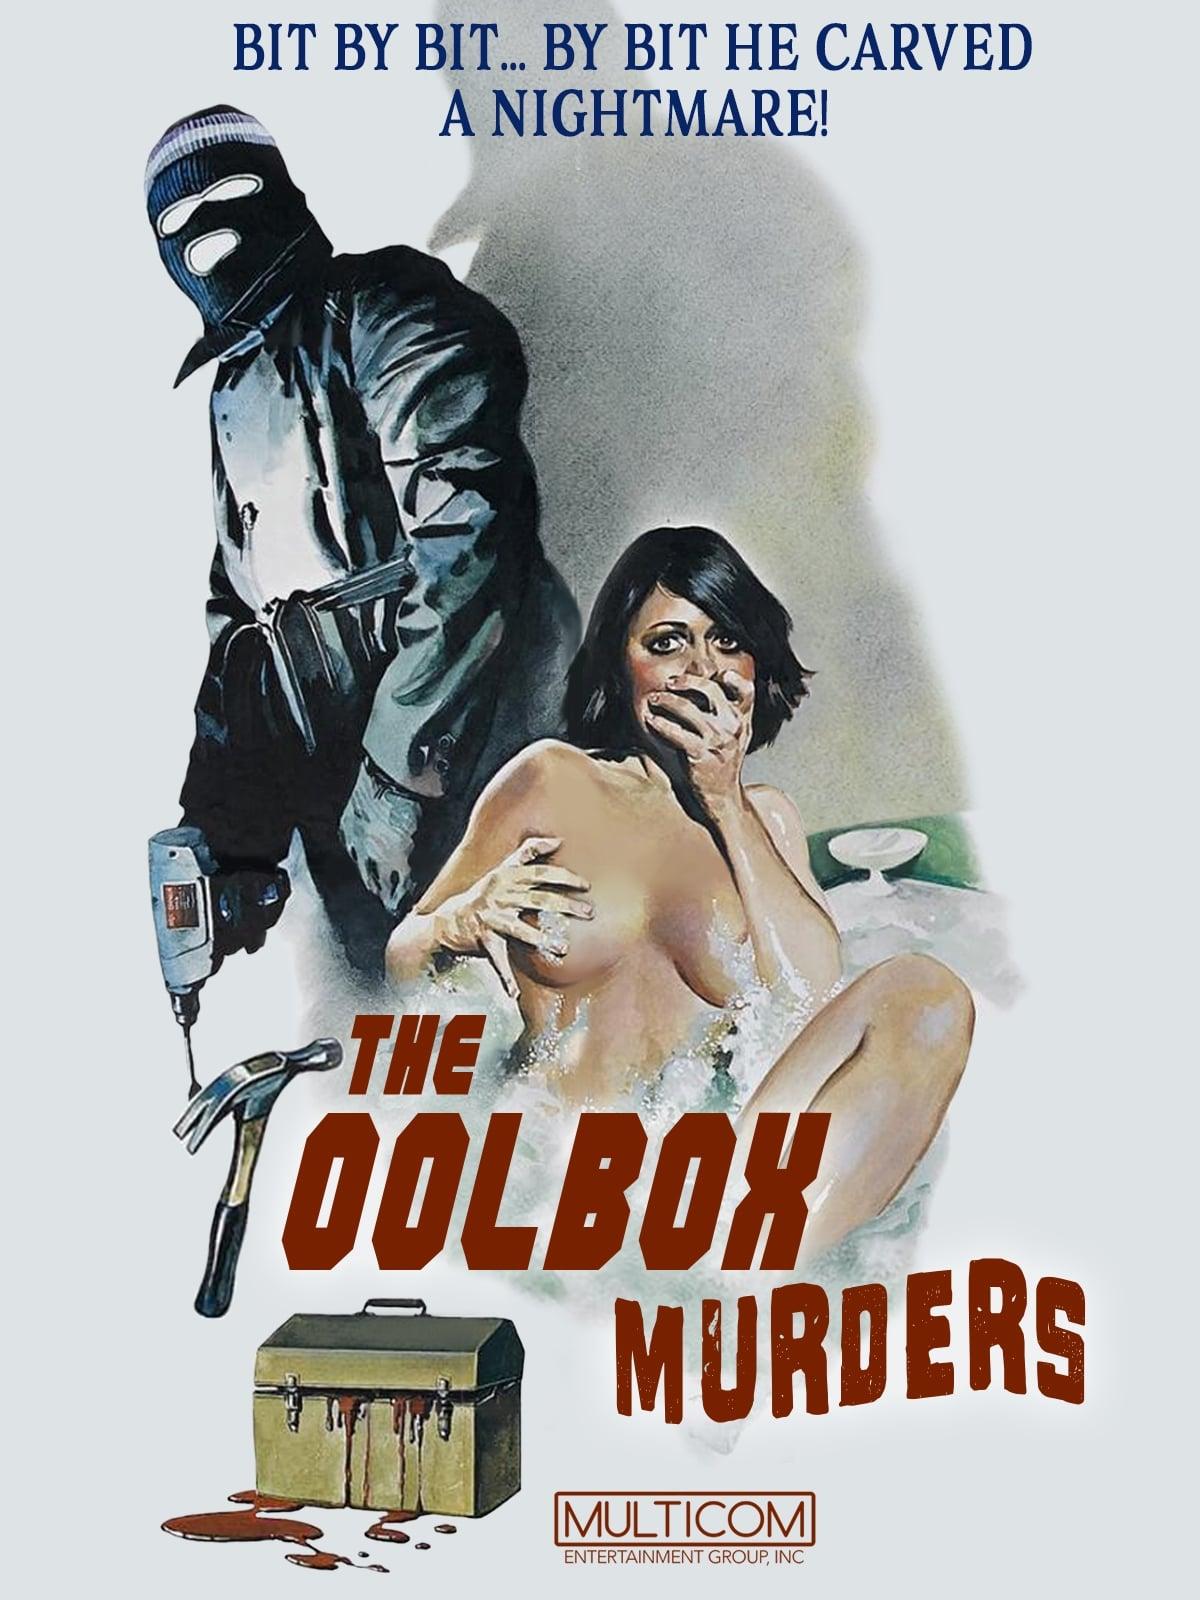 The Toolbox Murders poster